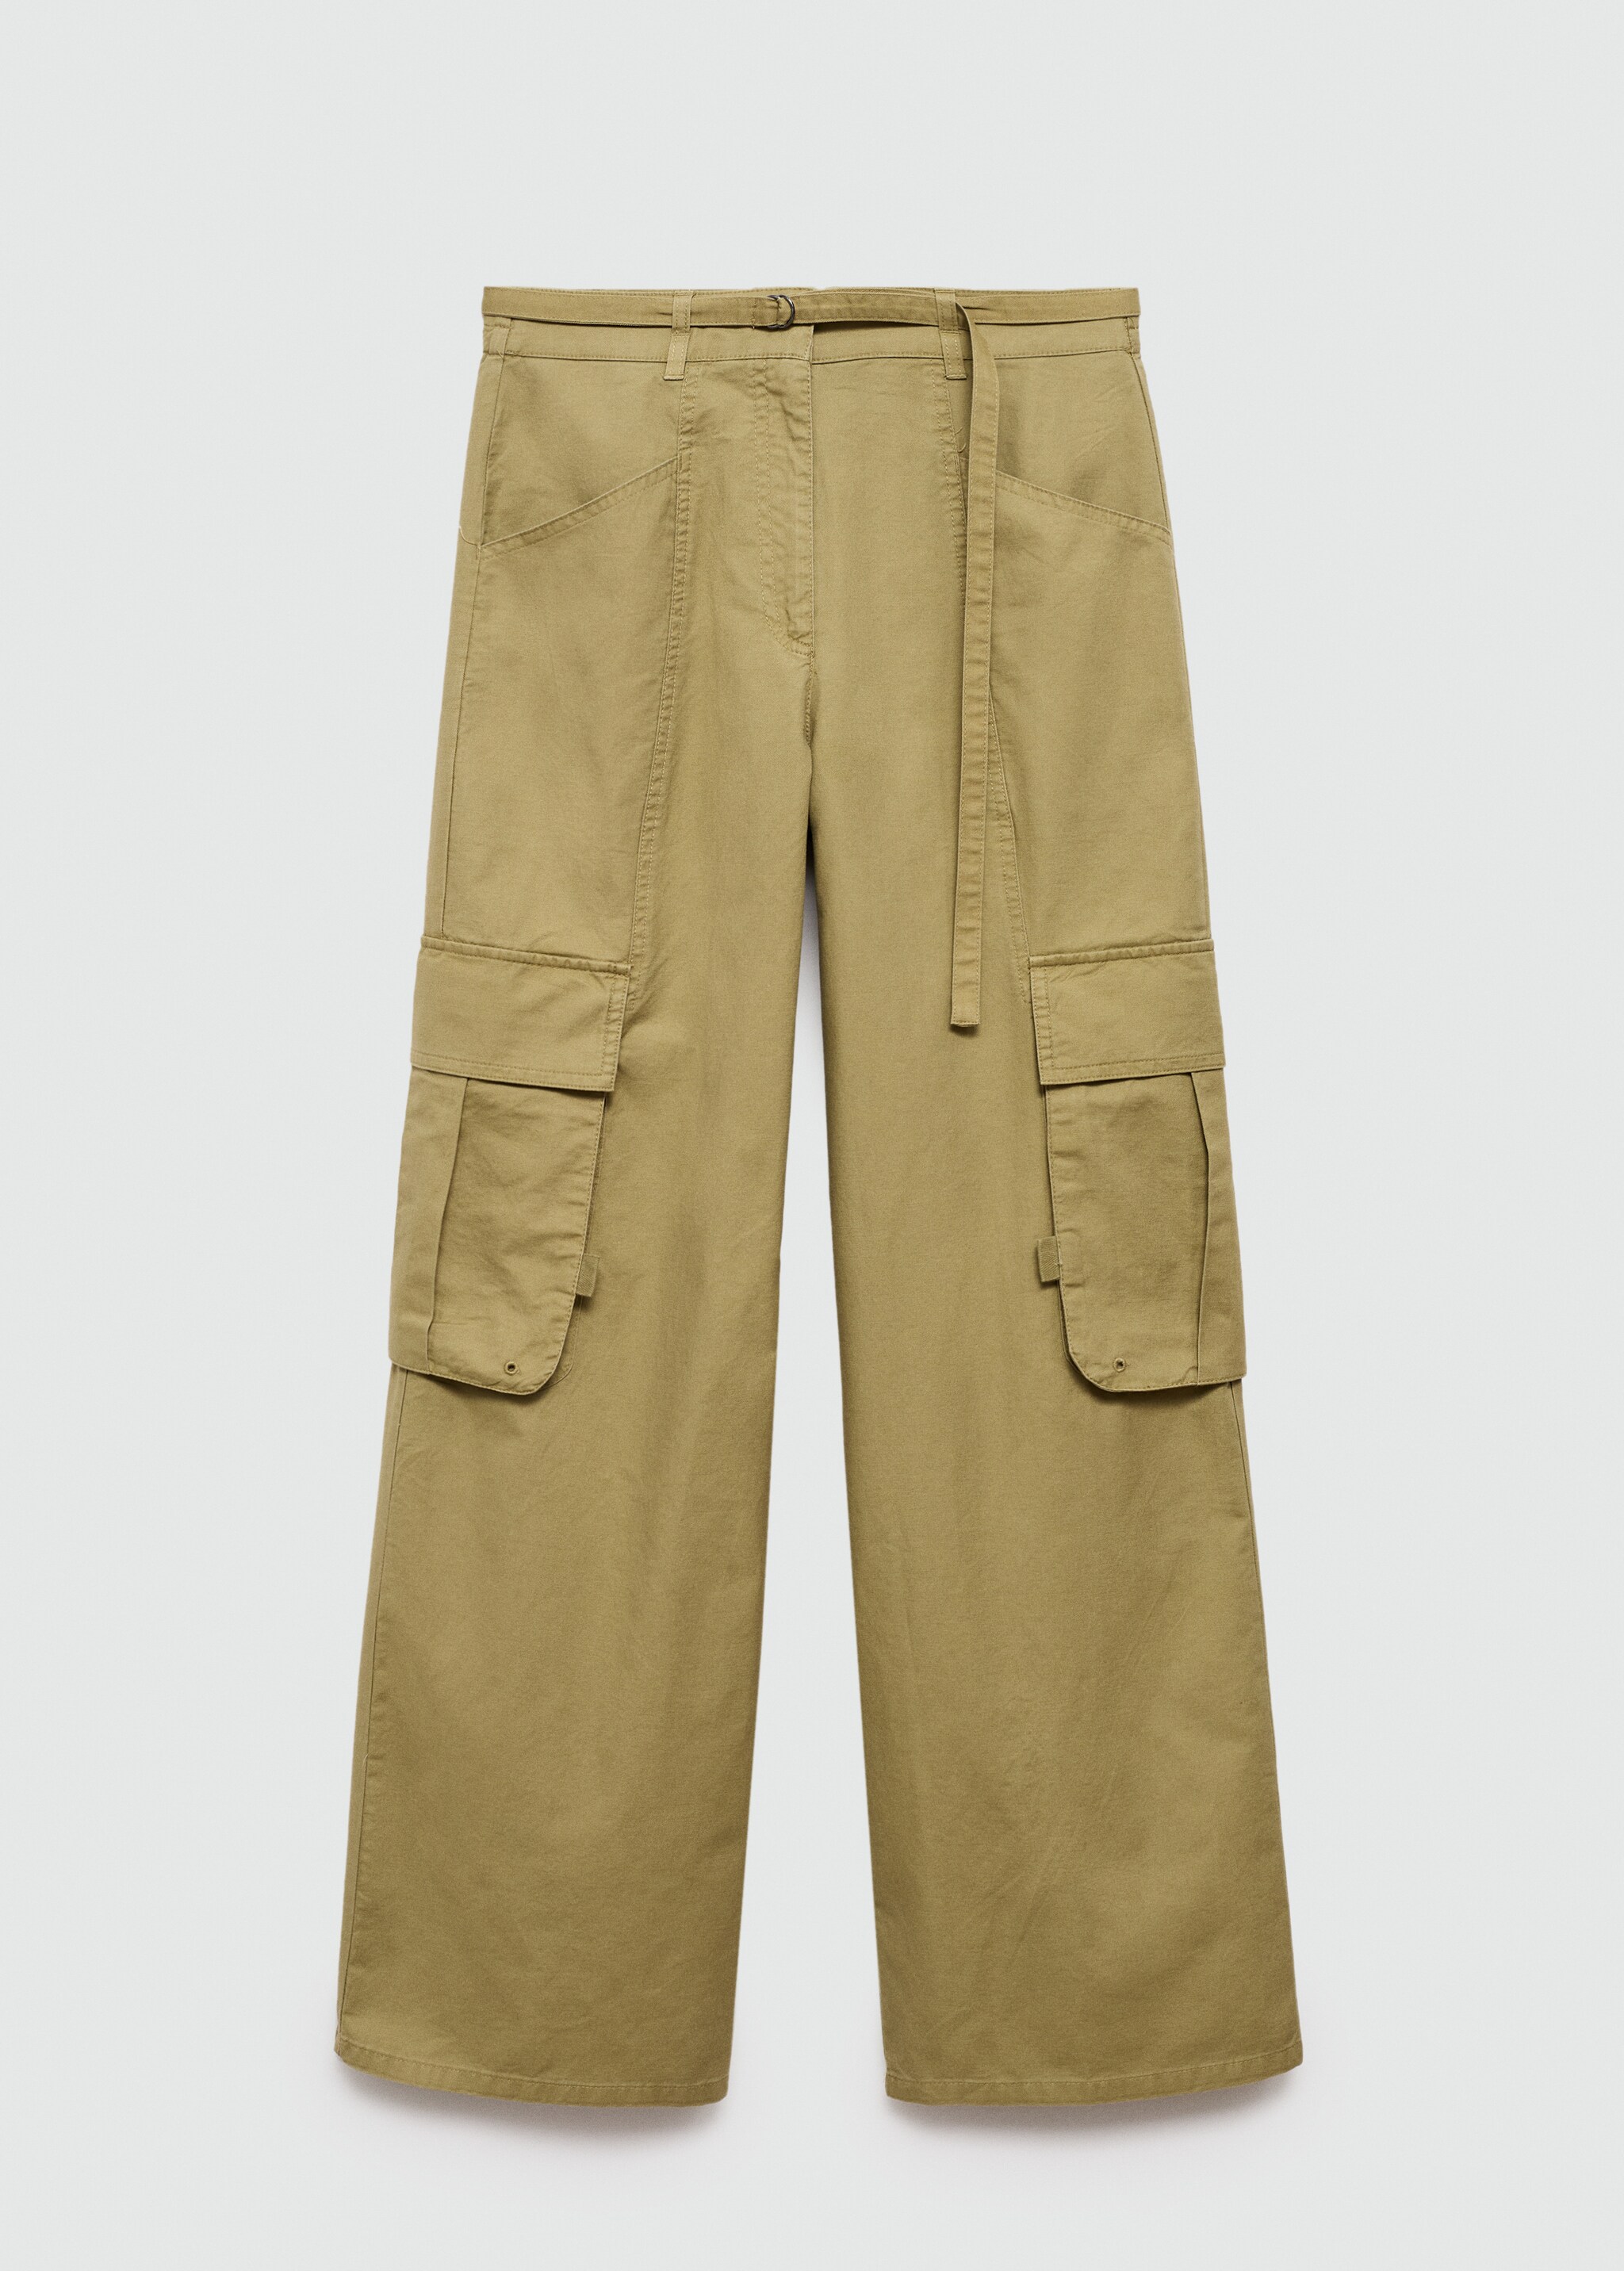 Pocket cargo pants - Article without model